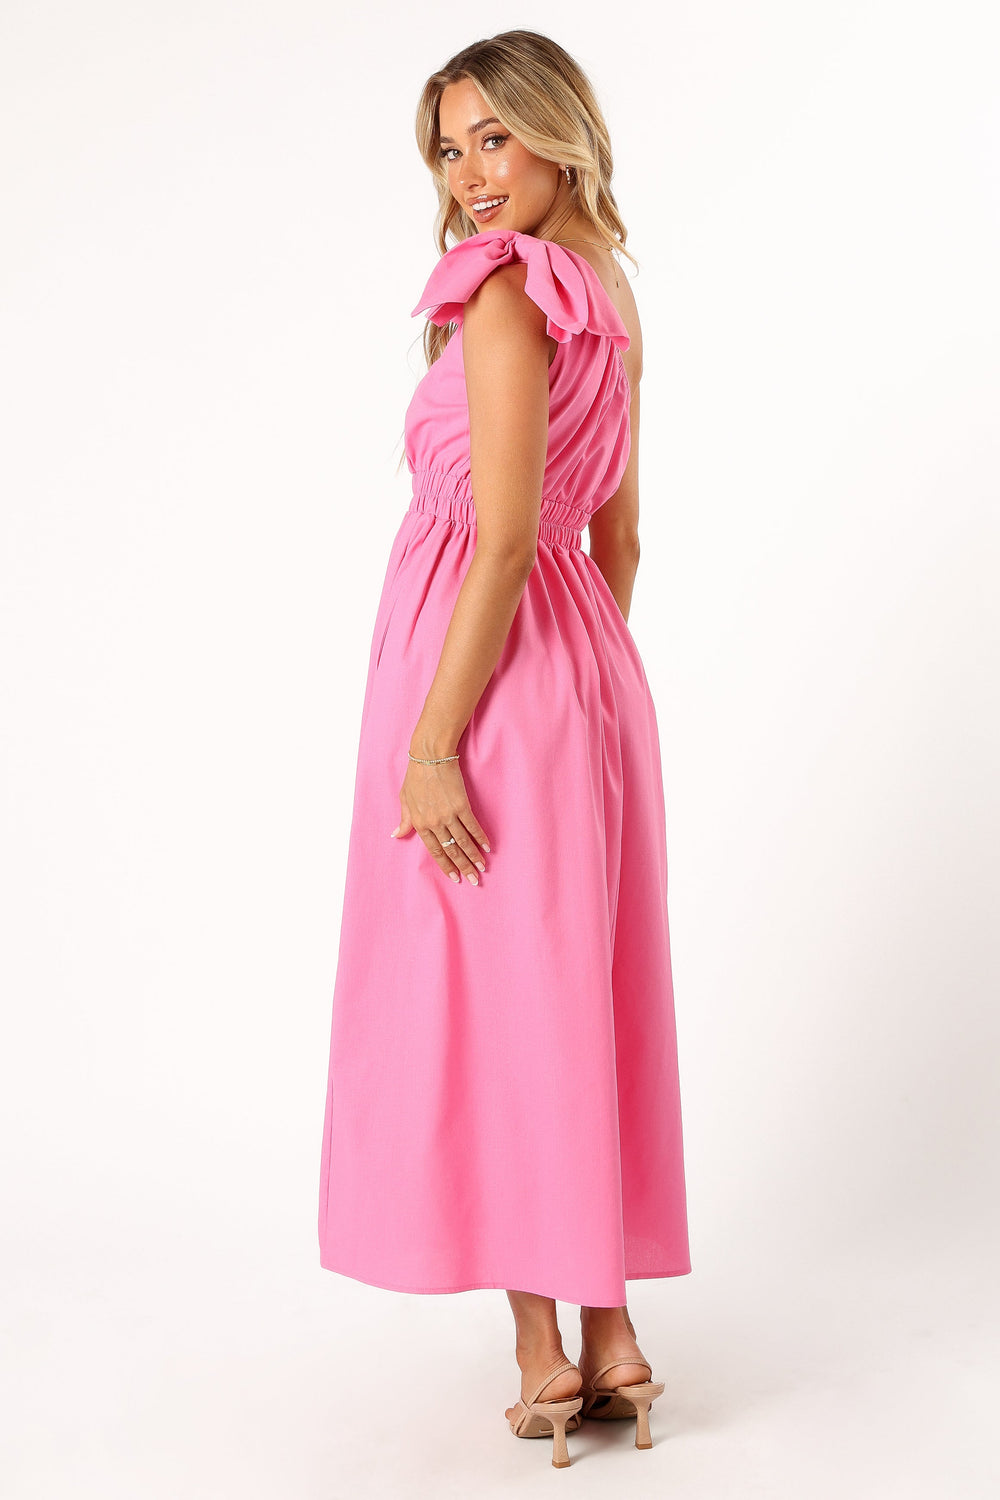 Petal and Pup USA DRESSES Kailey One Shoulder Maxi Dress - Hot Pink